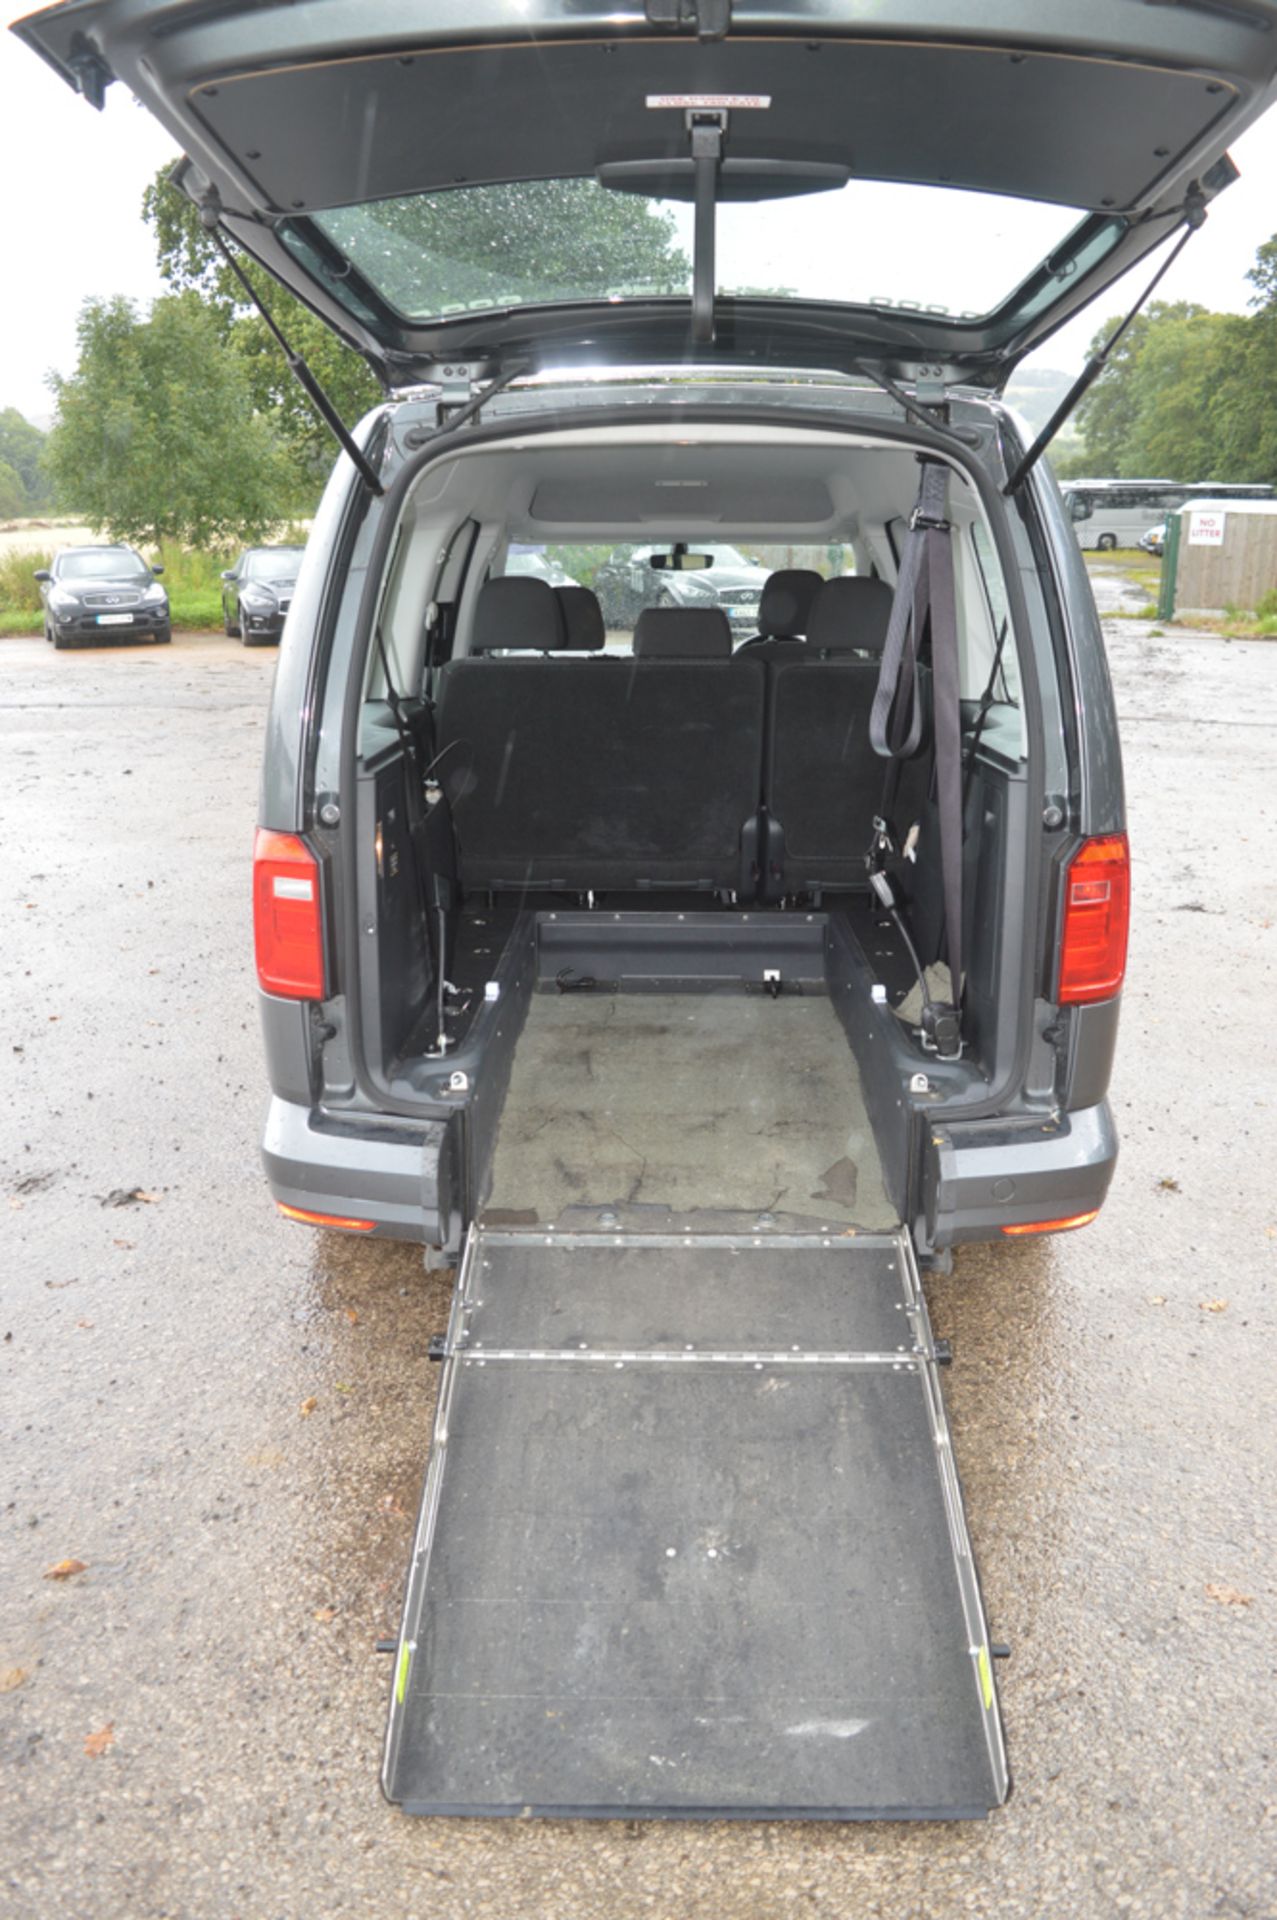 Volkswagen Caddy Maxi C20 Life TDI 5 seat wheelchaire access MPV  Registration Number: SJ16 WGA Date - Image 7 of 12